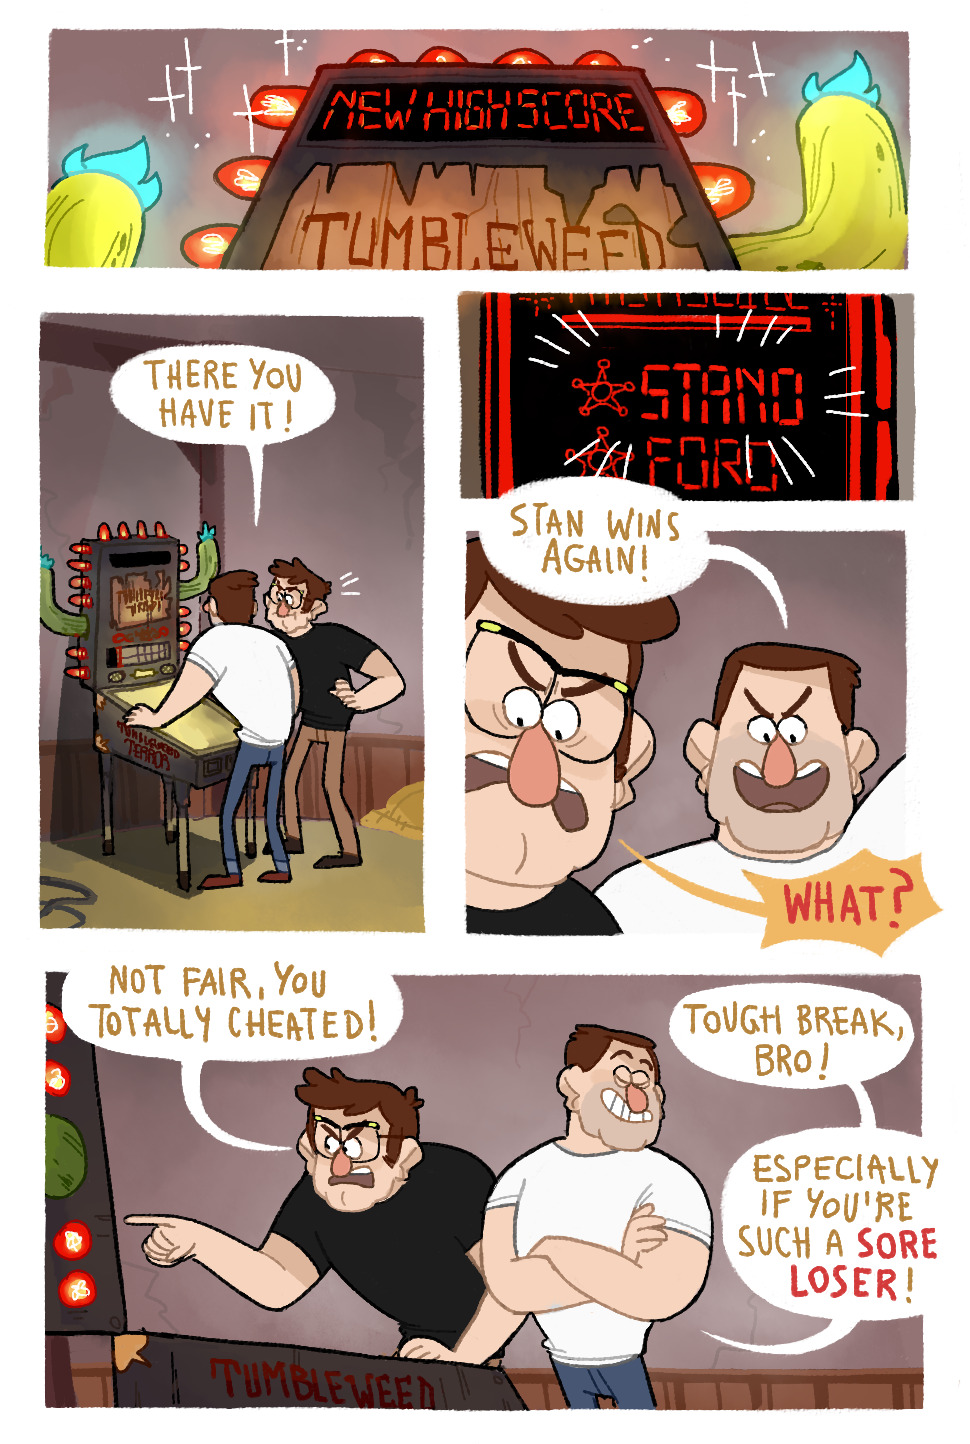 birbykind:  i think about stan’s “old creepy pinball machine” that punishes